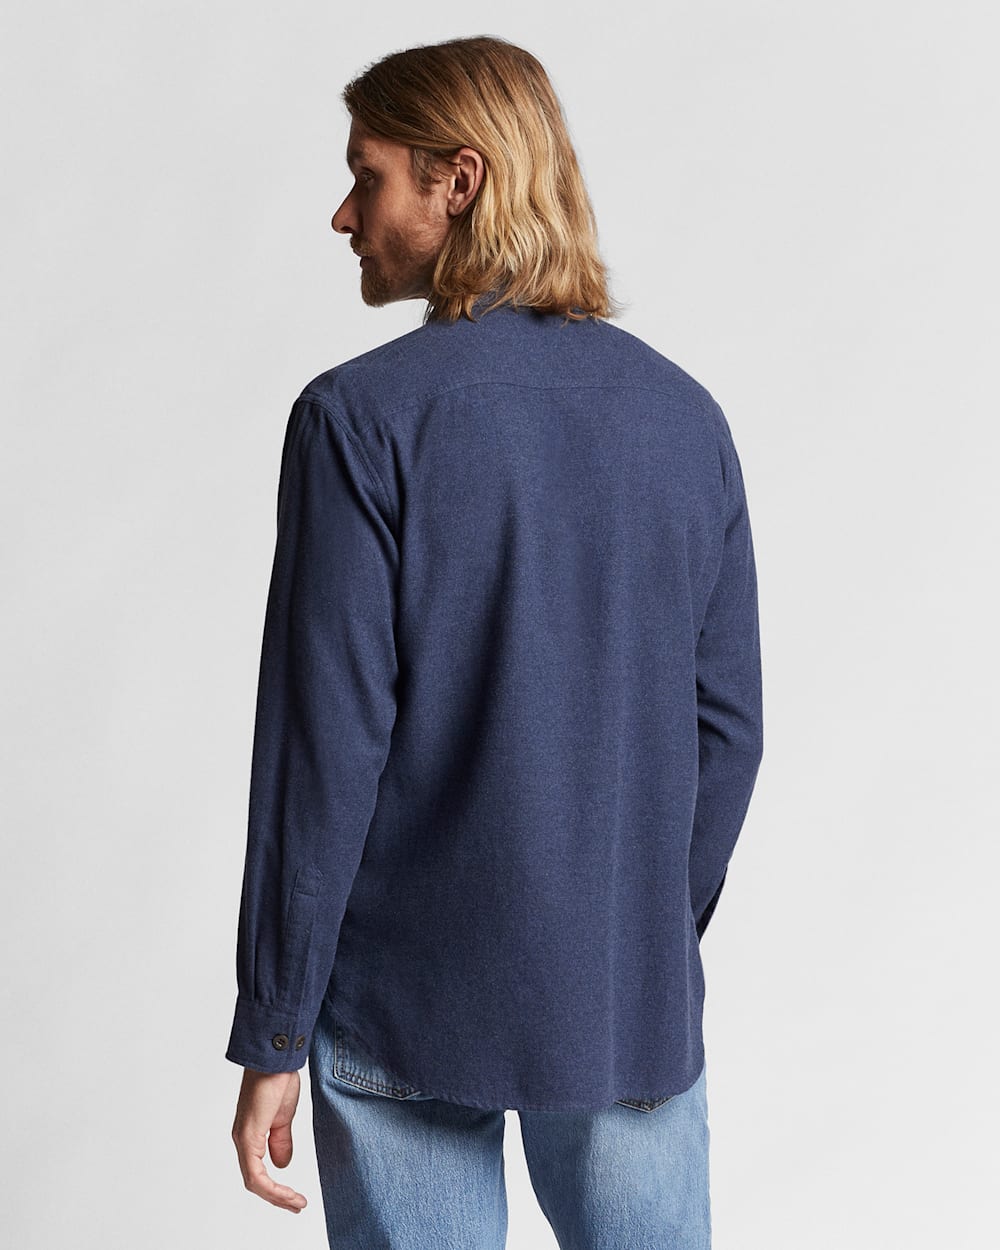 ALTERNATE VIEW OF BURNSIDE DOUBLE-BRUSHED FLANNEL SHIRT IN BLUE image number 2